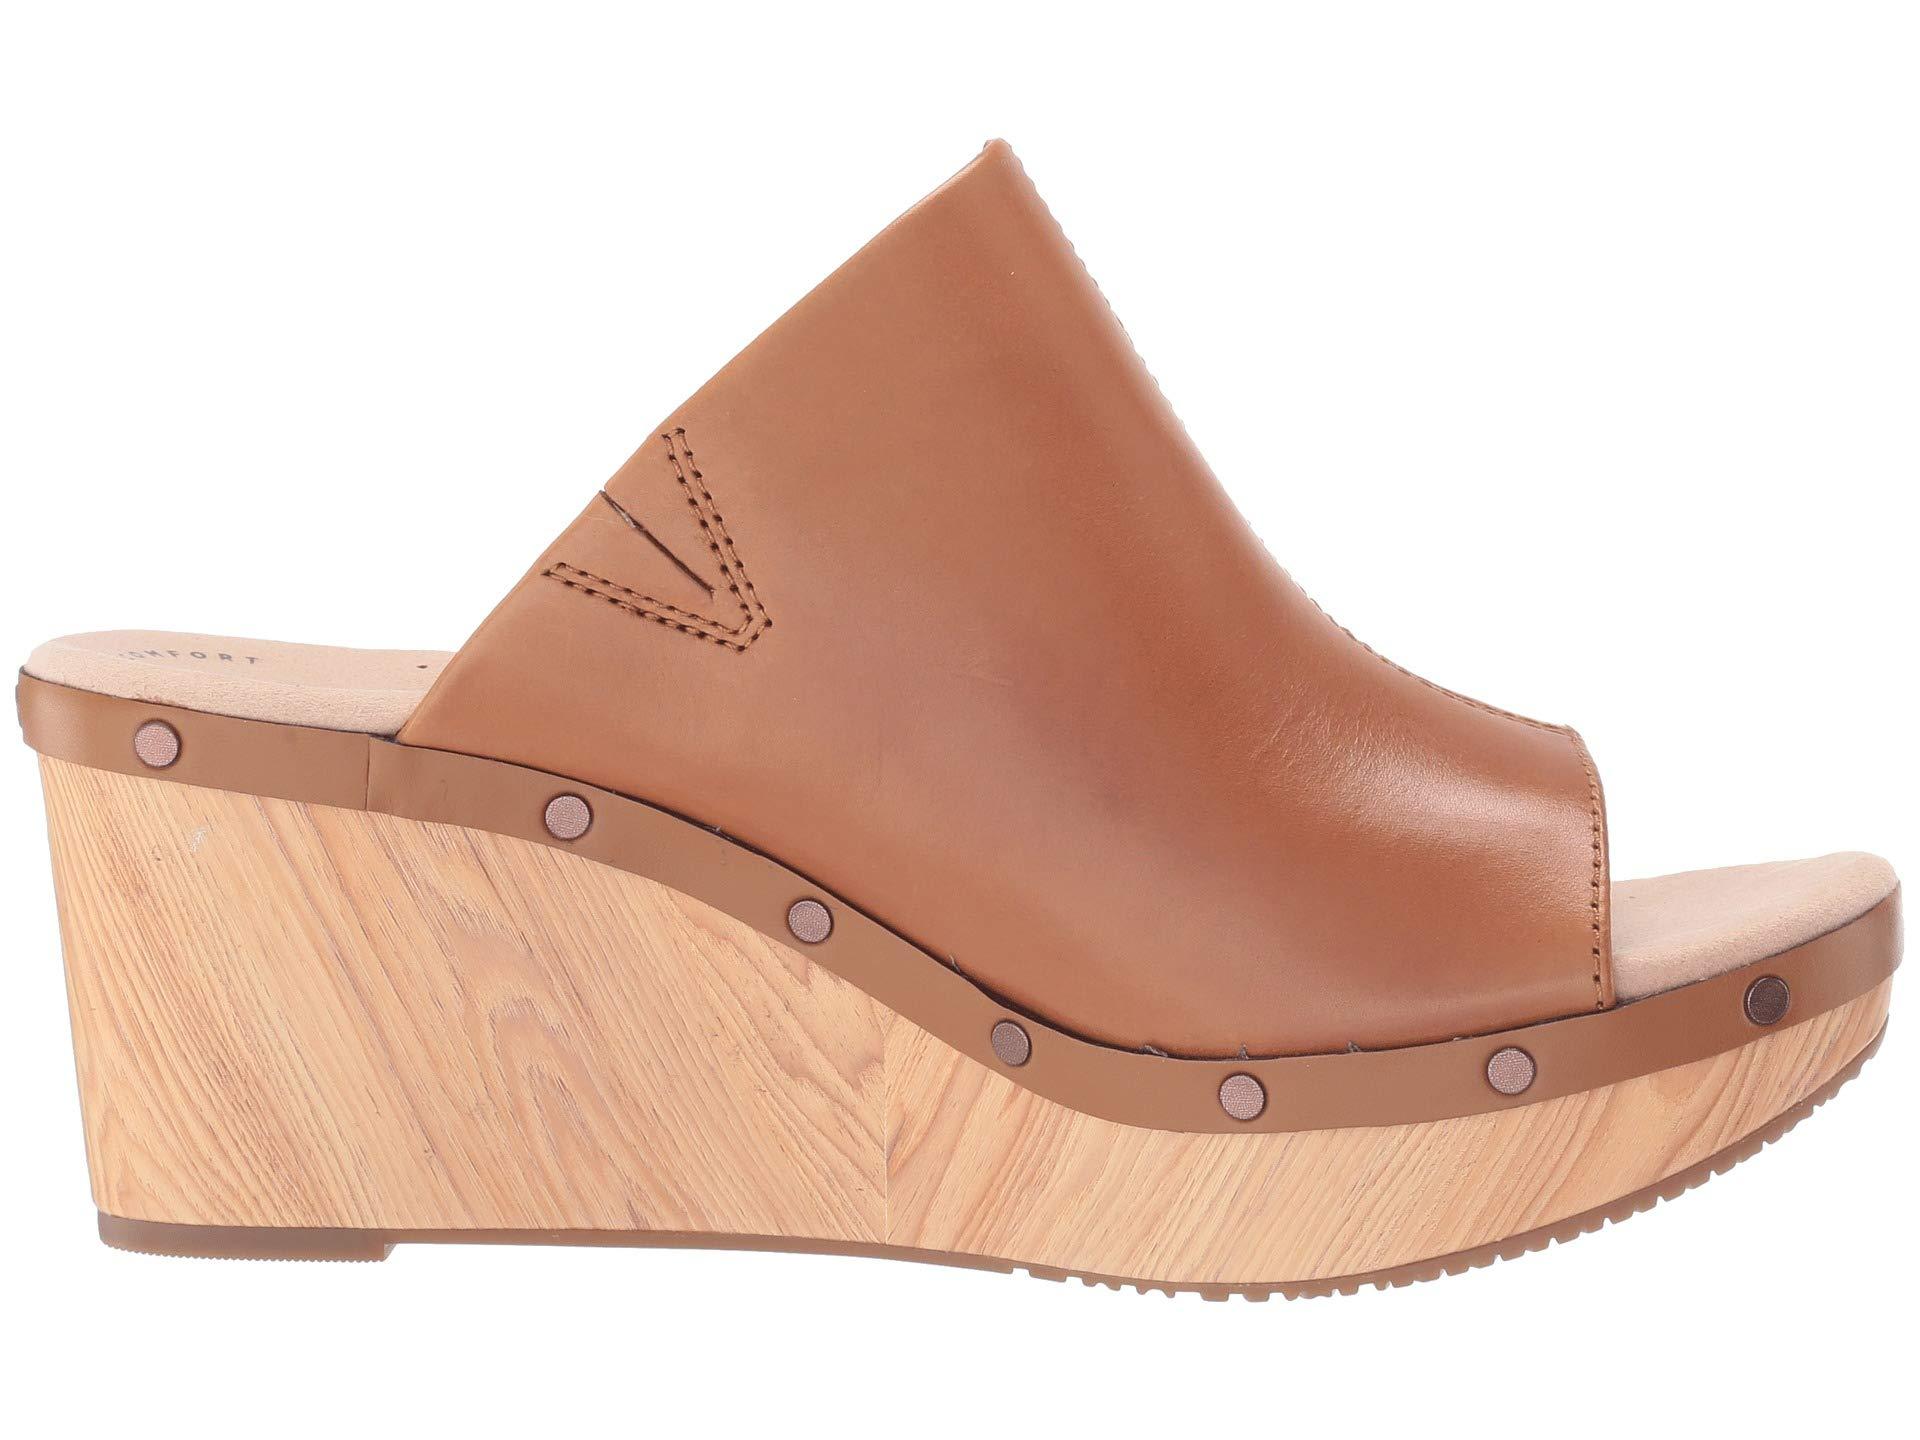 Clarks Leather Annadel Molly Wedge 